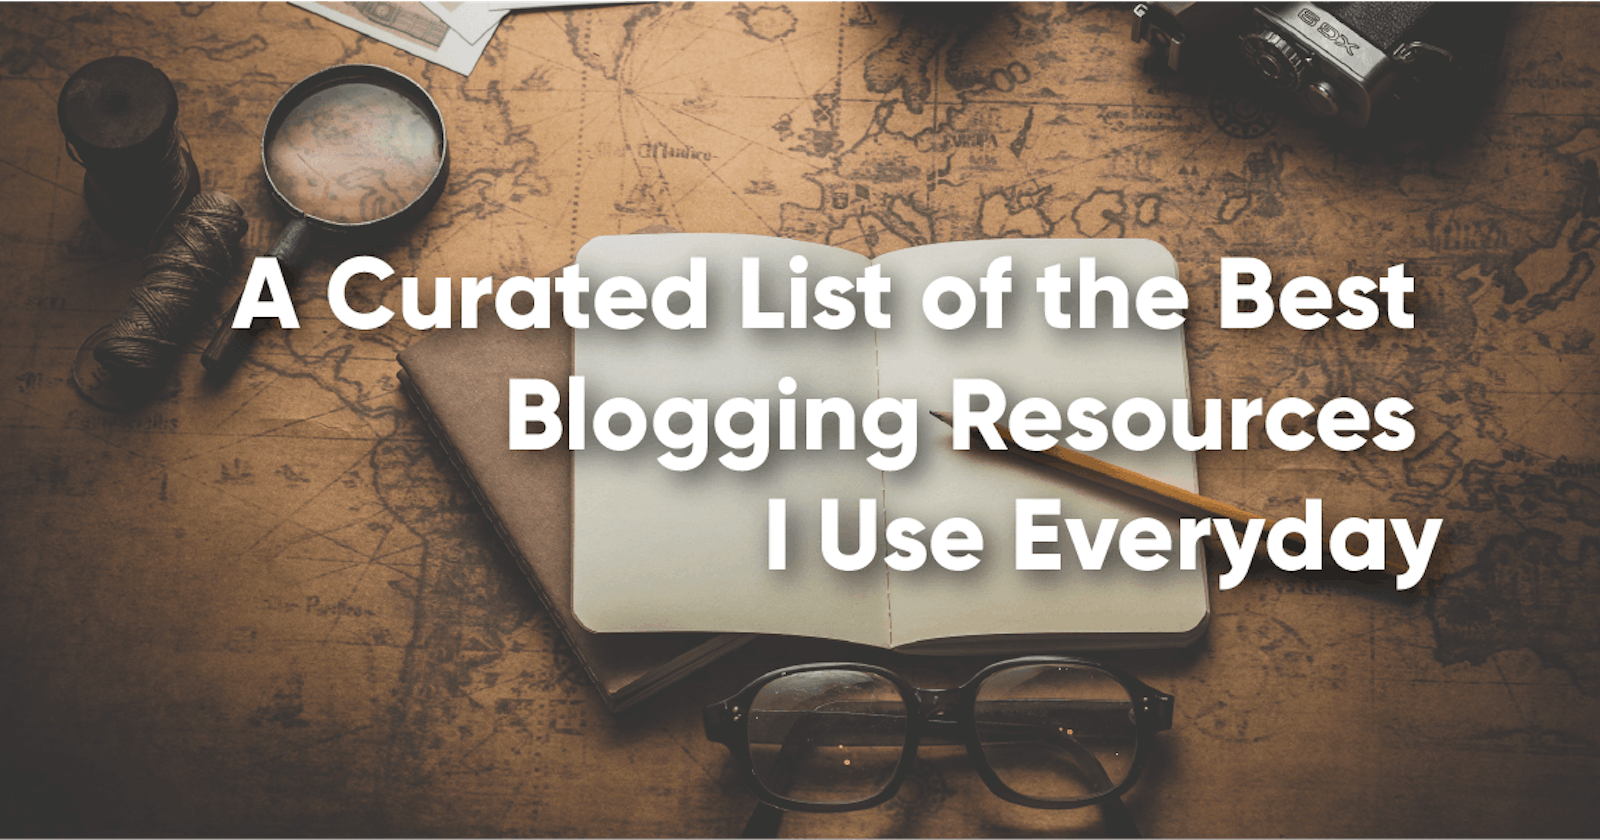 A Curated List of the Best Blogging Resources I Use Everyday